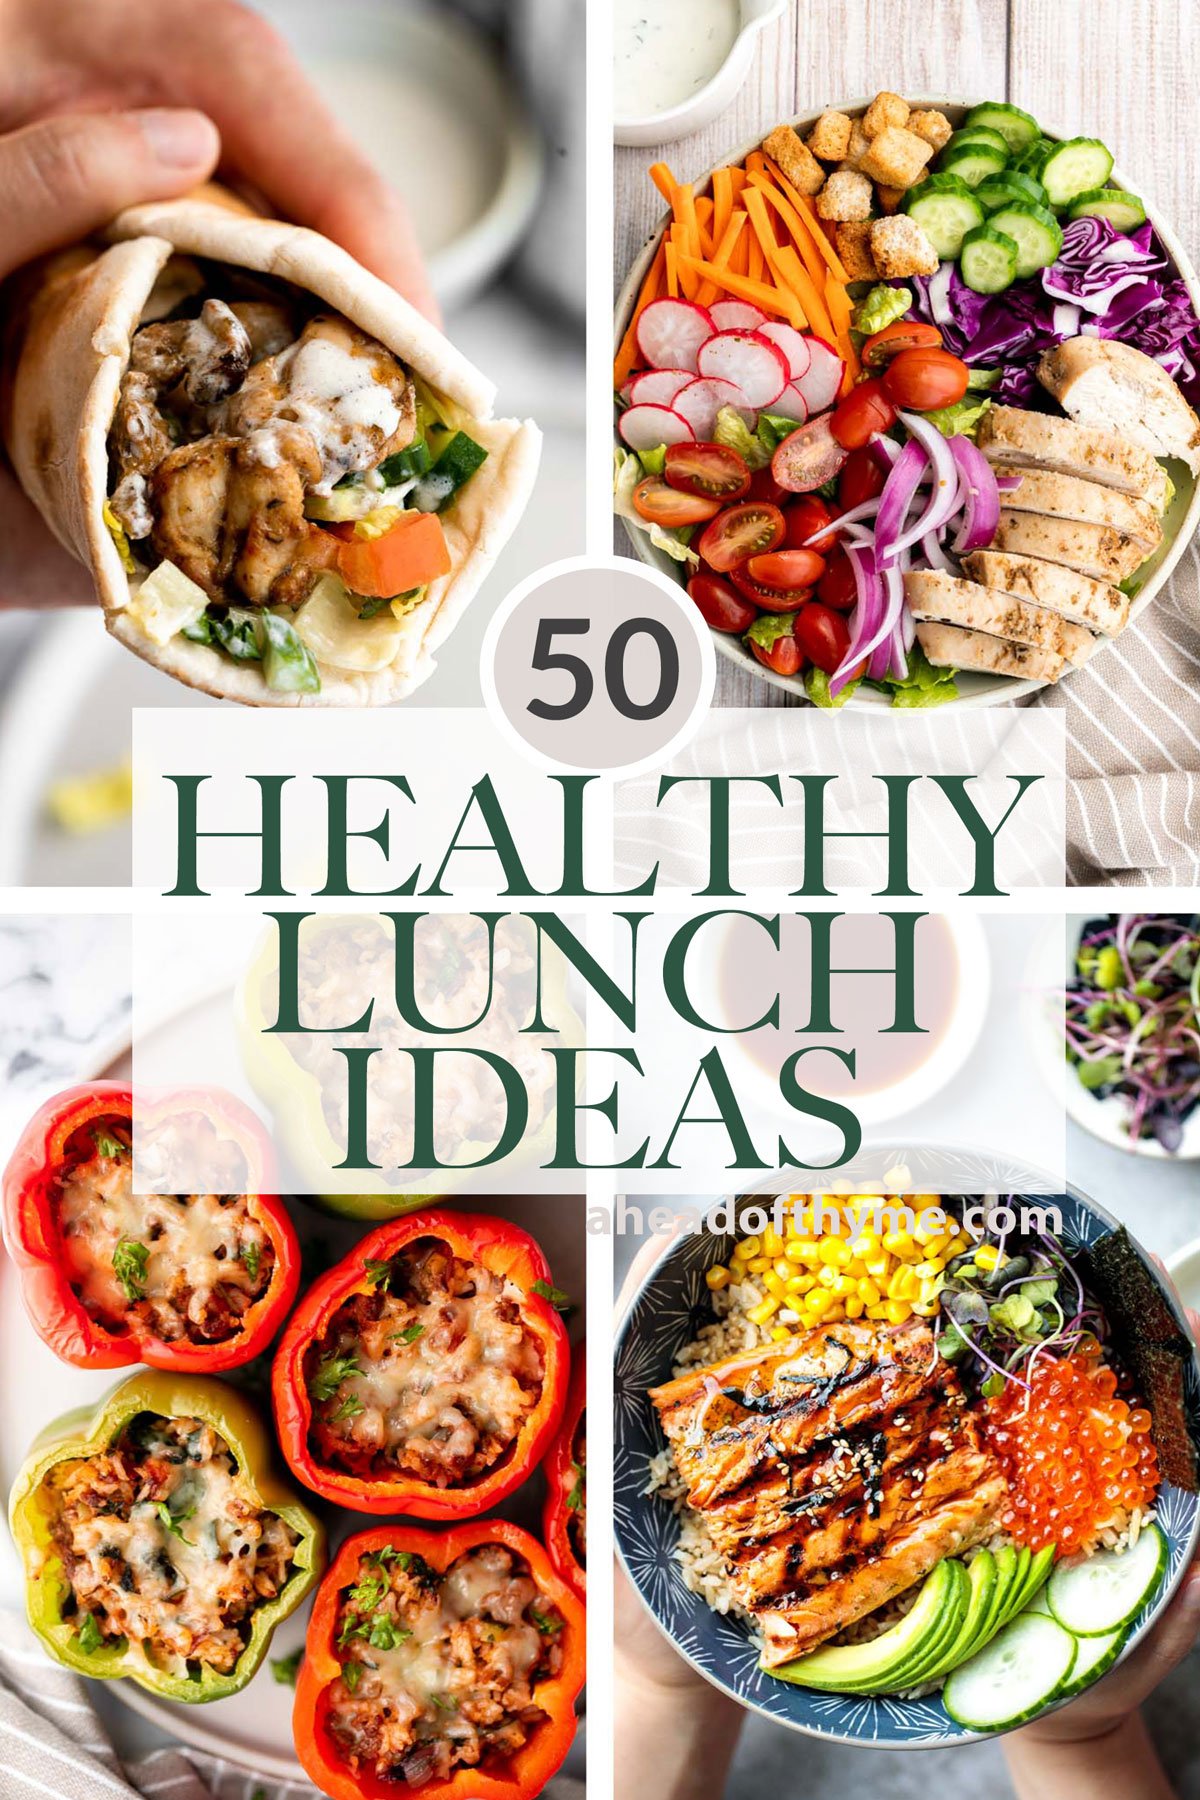 50+ Healthy Lunches